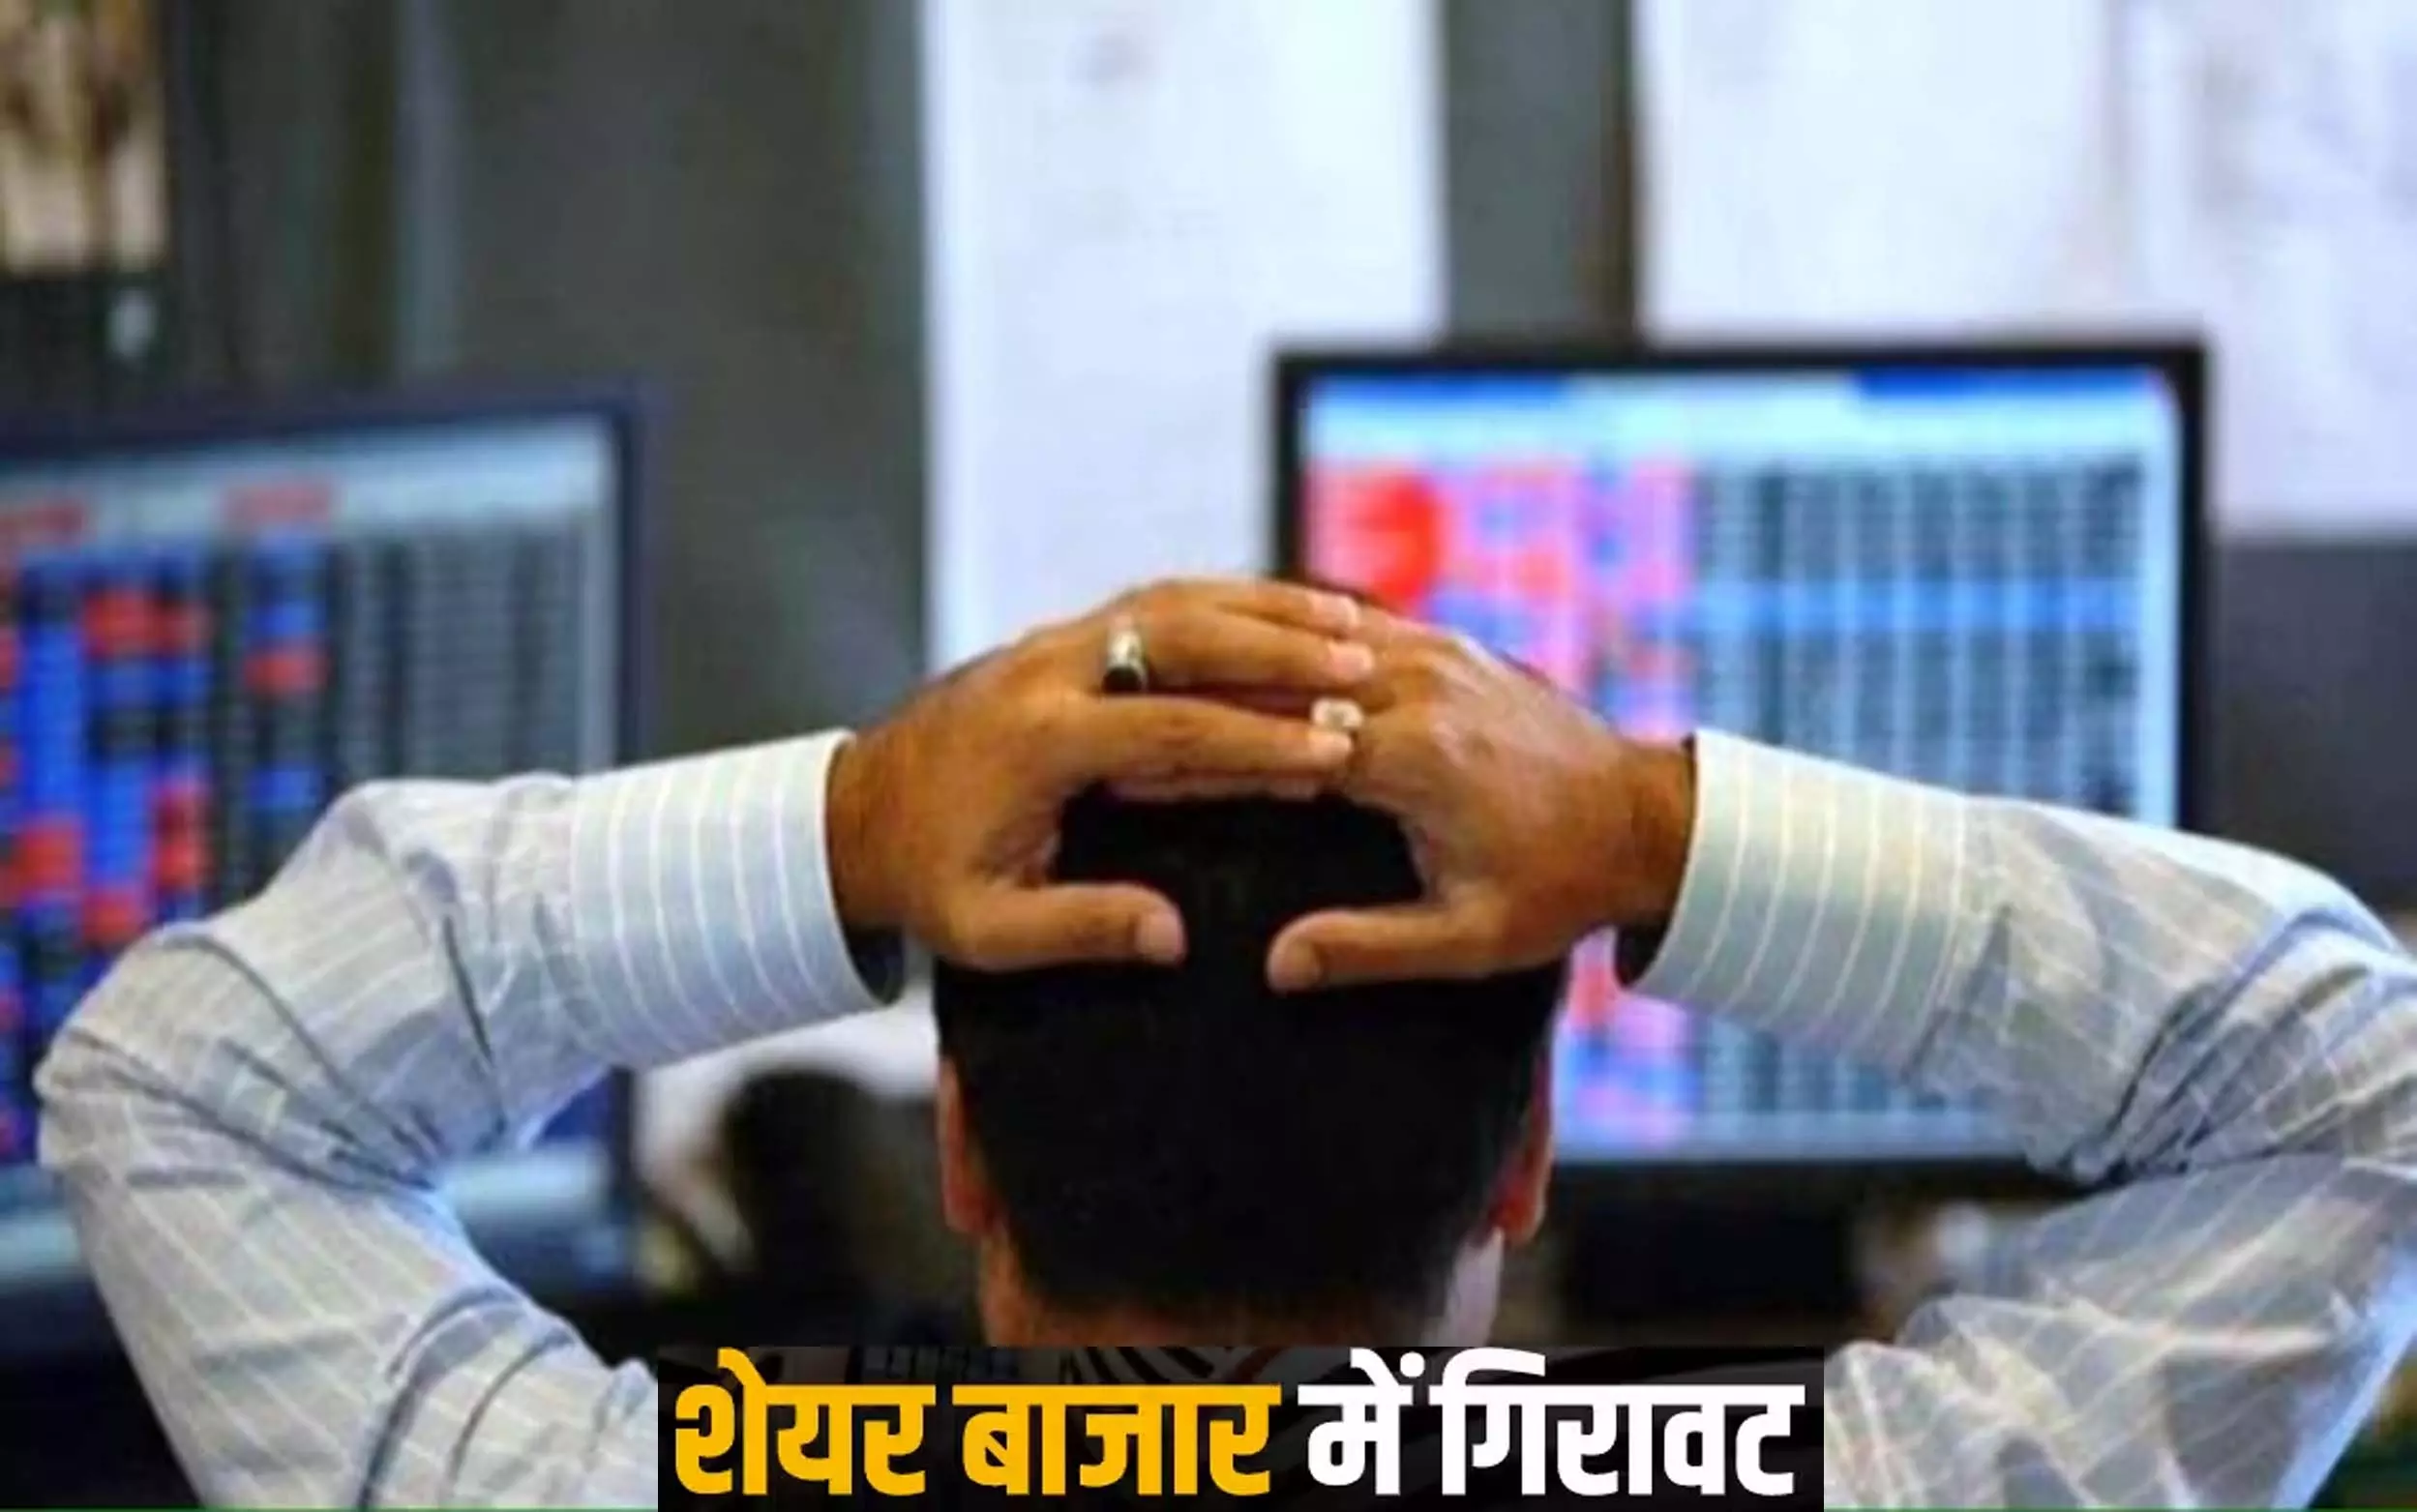 Stock market closed with heavy fall, Sensex fell by 736 and Nifty fell by 108 points